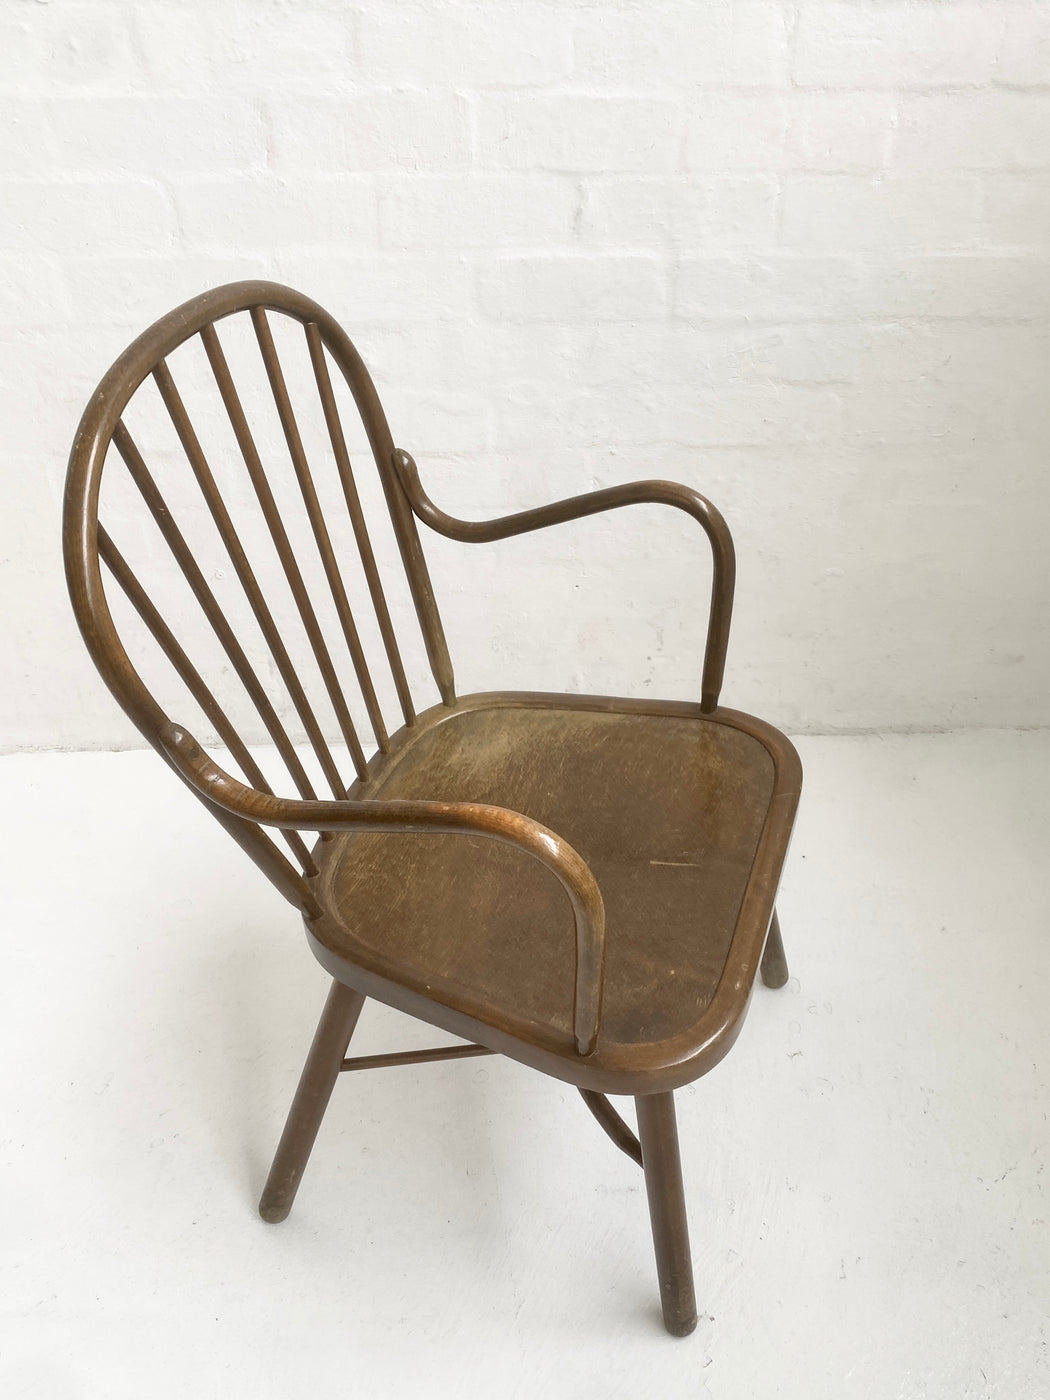 Danish 1940s Spindle-back Chair